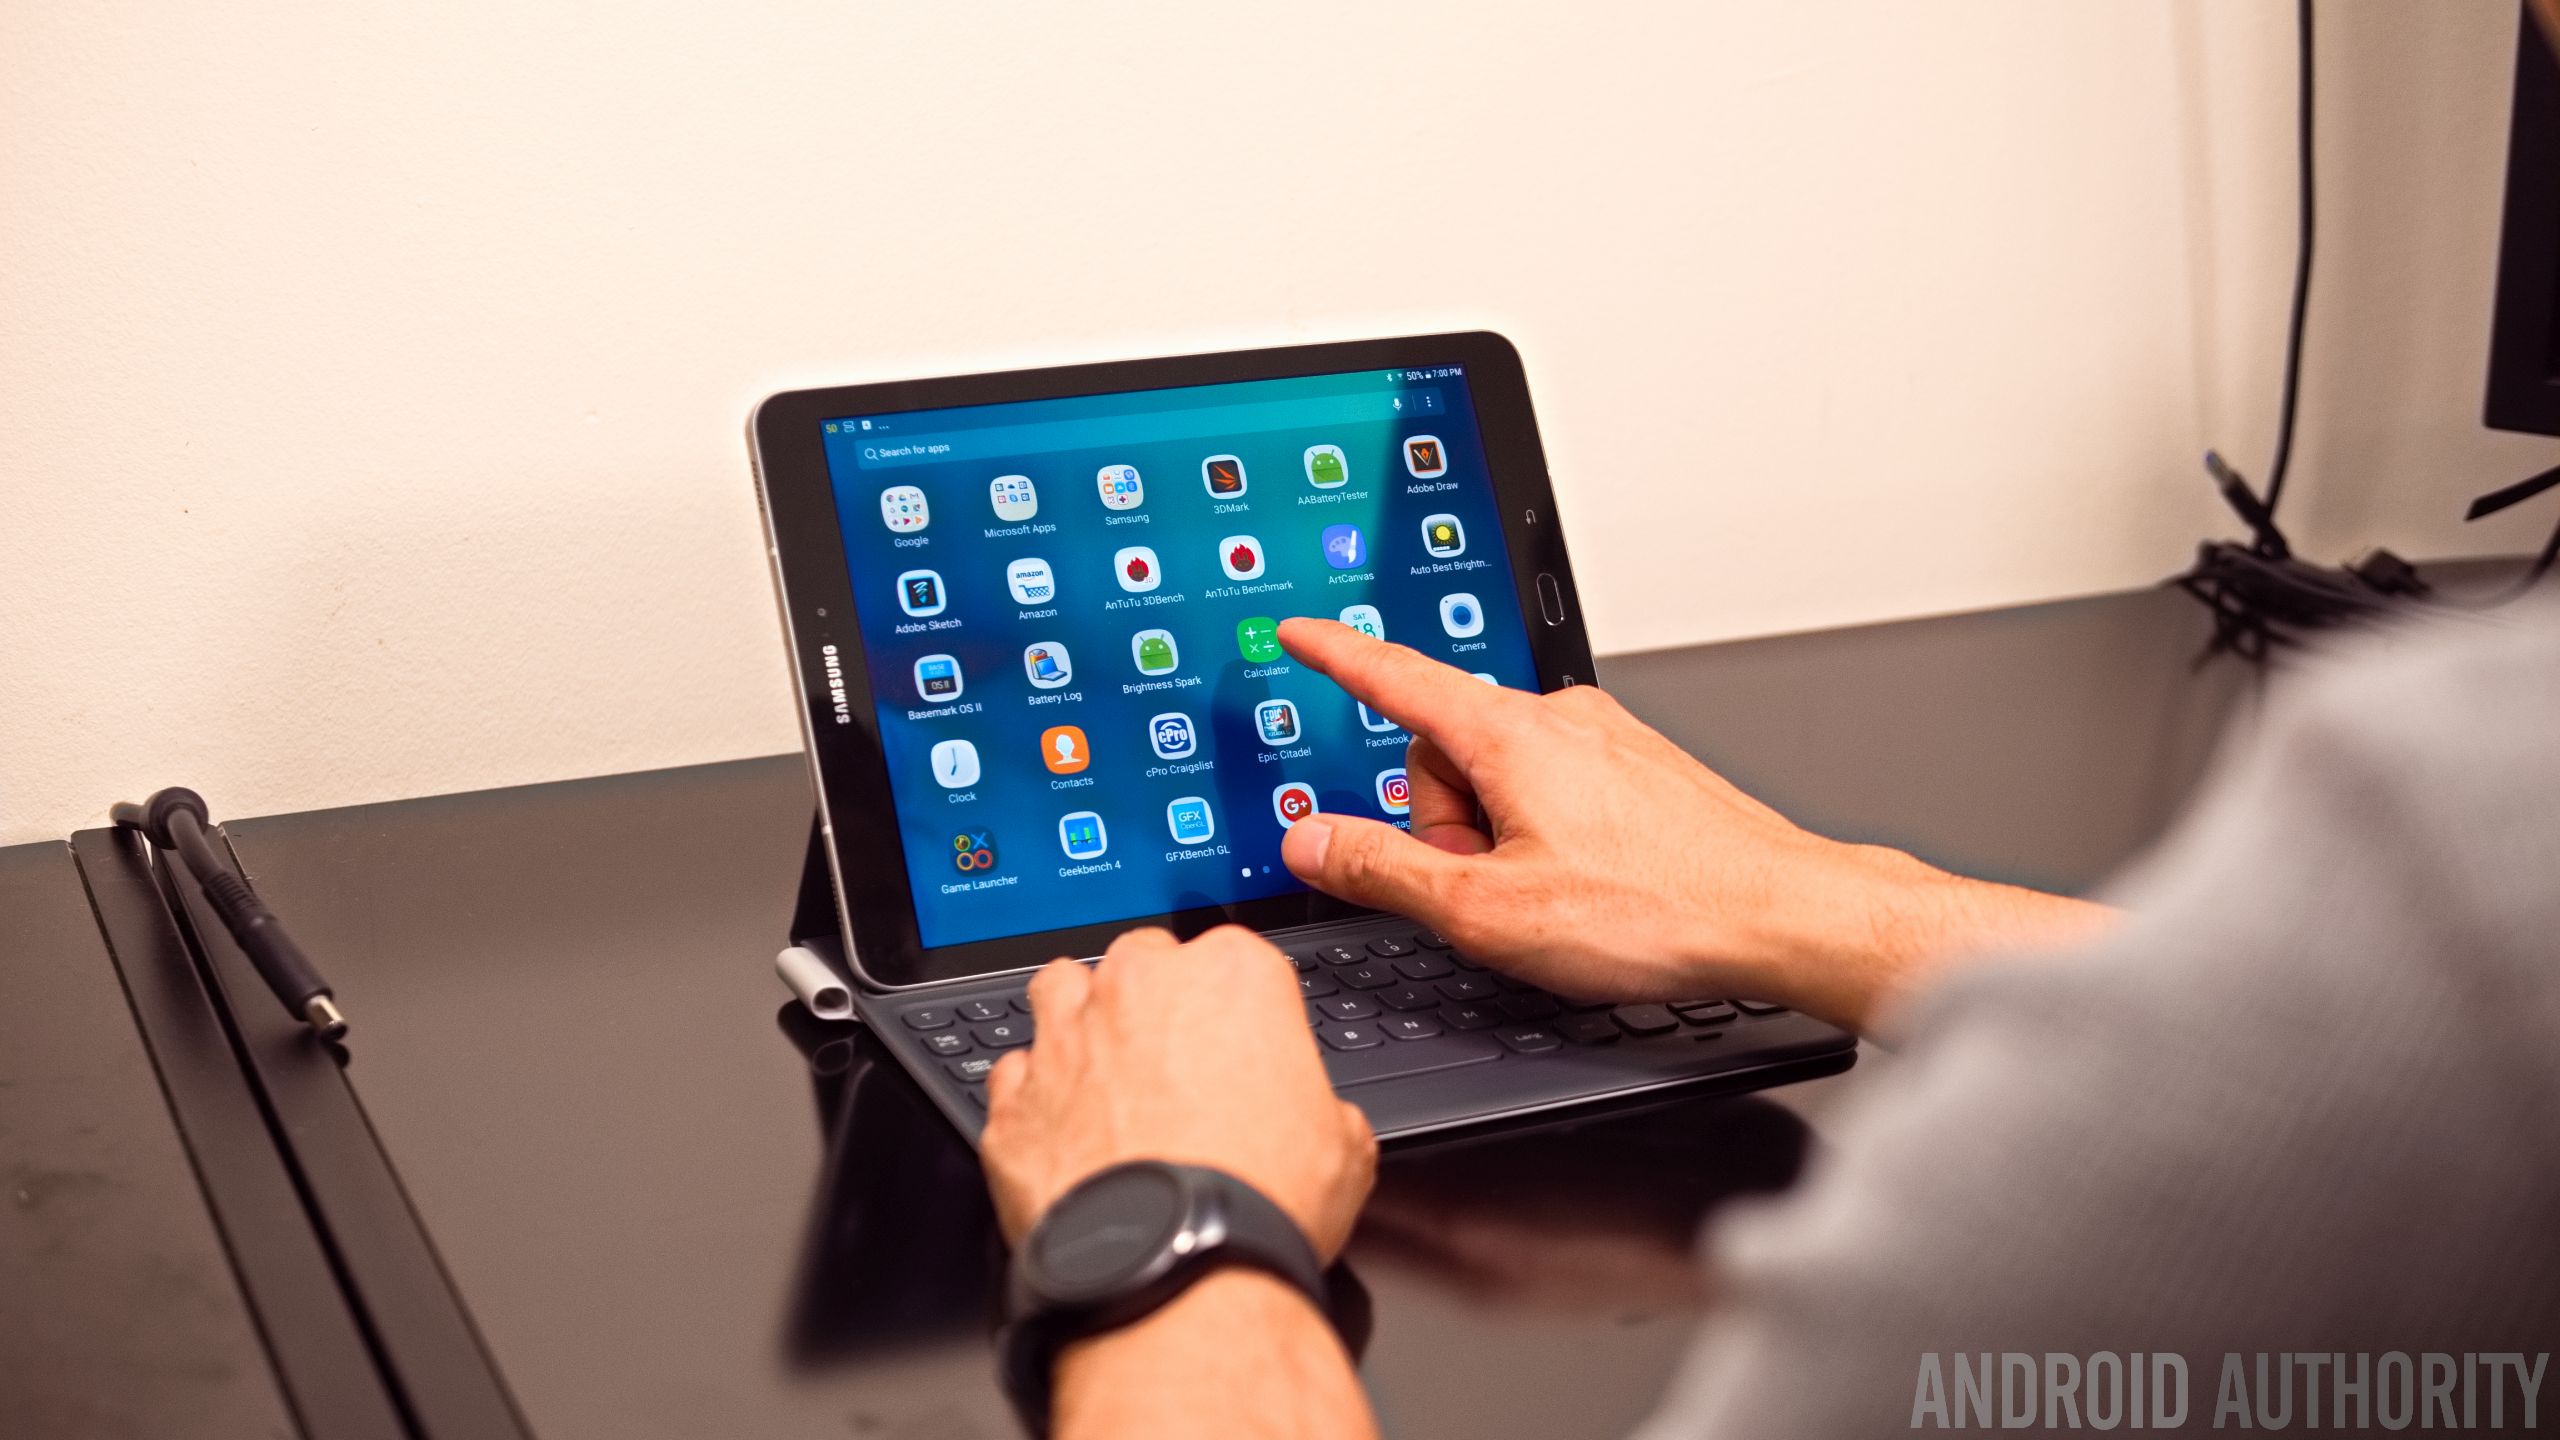 Samsung Galaxy Tab S3 review - Android Authority